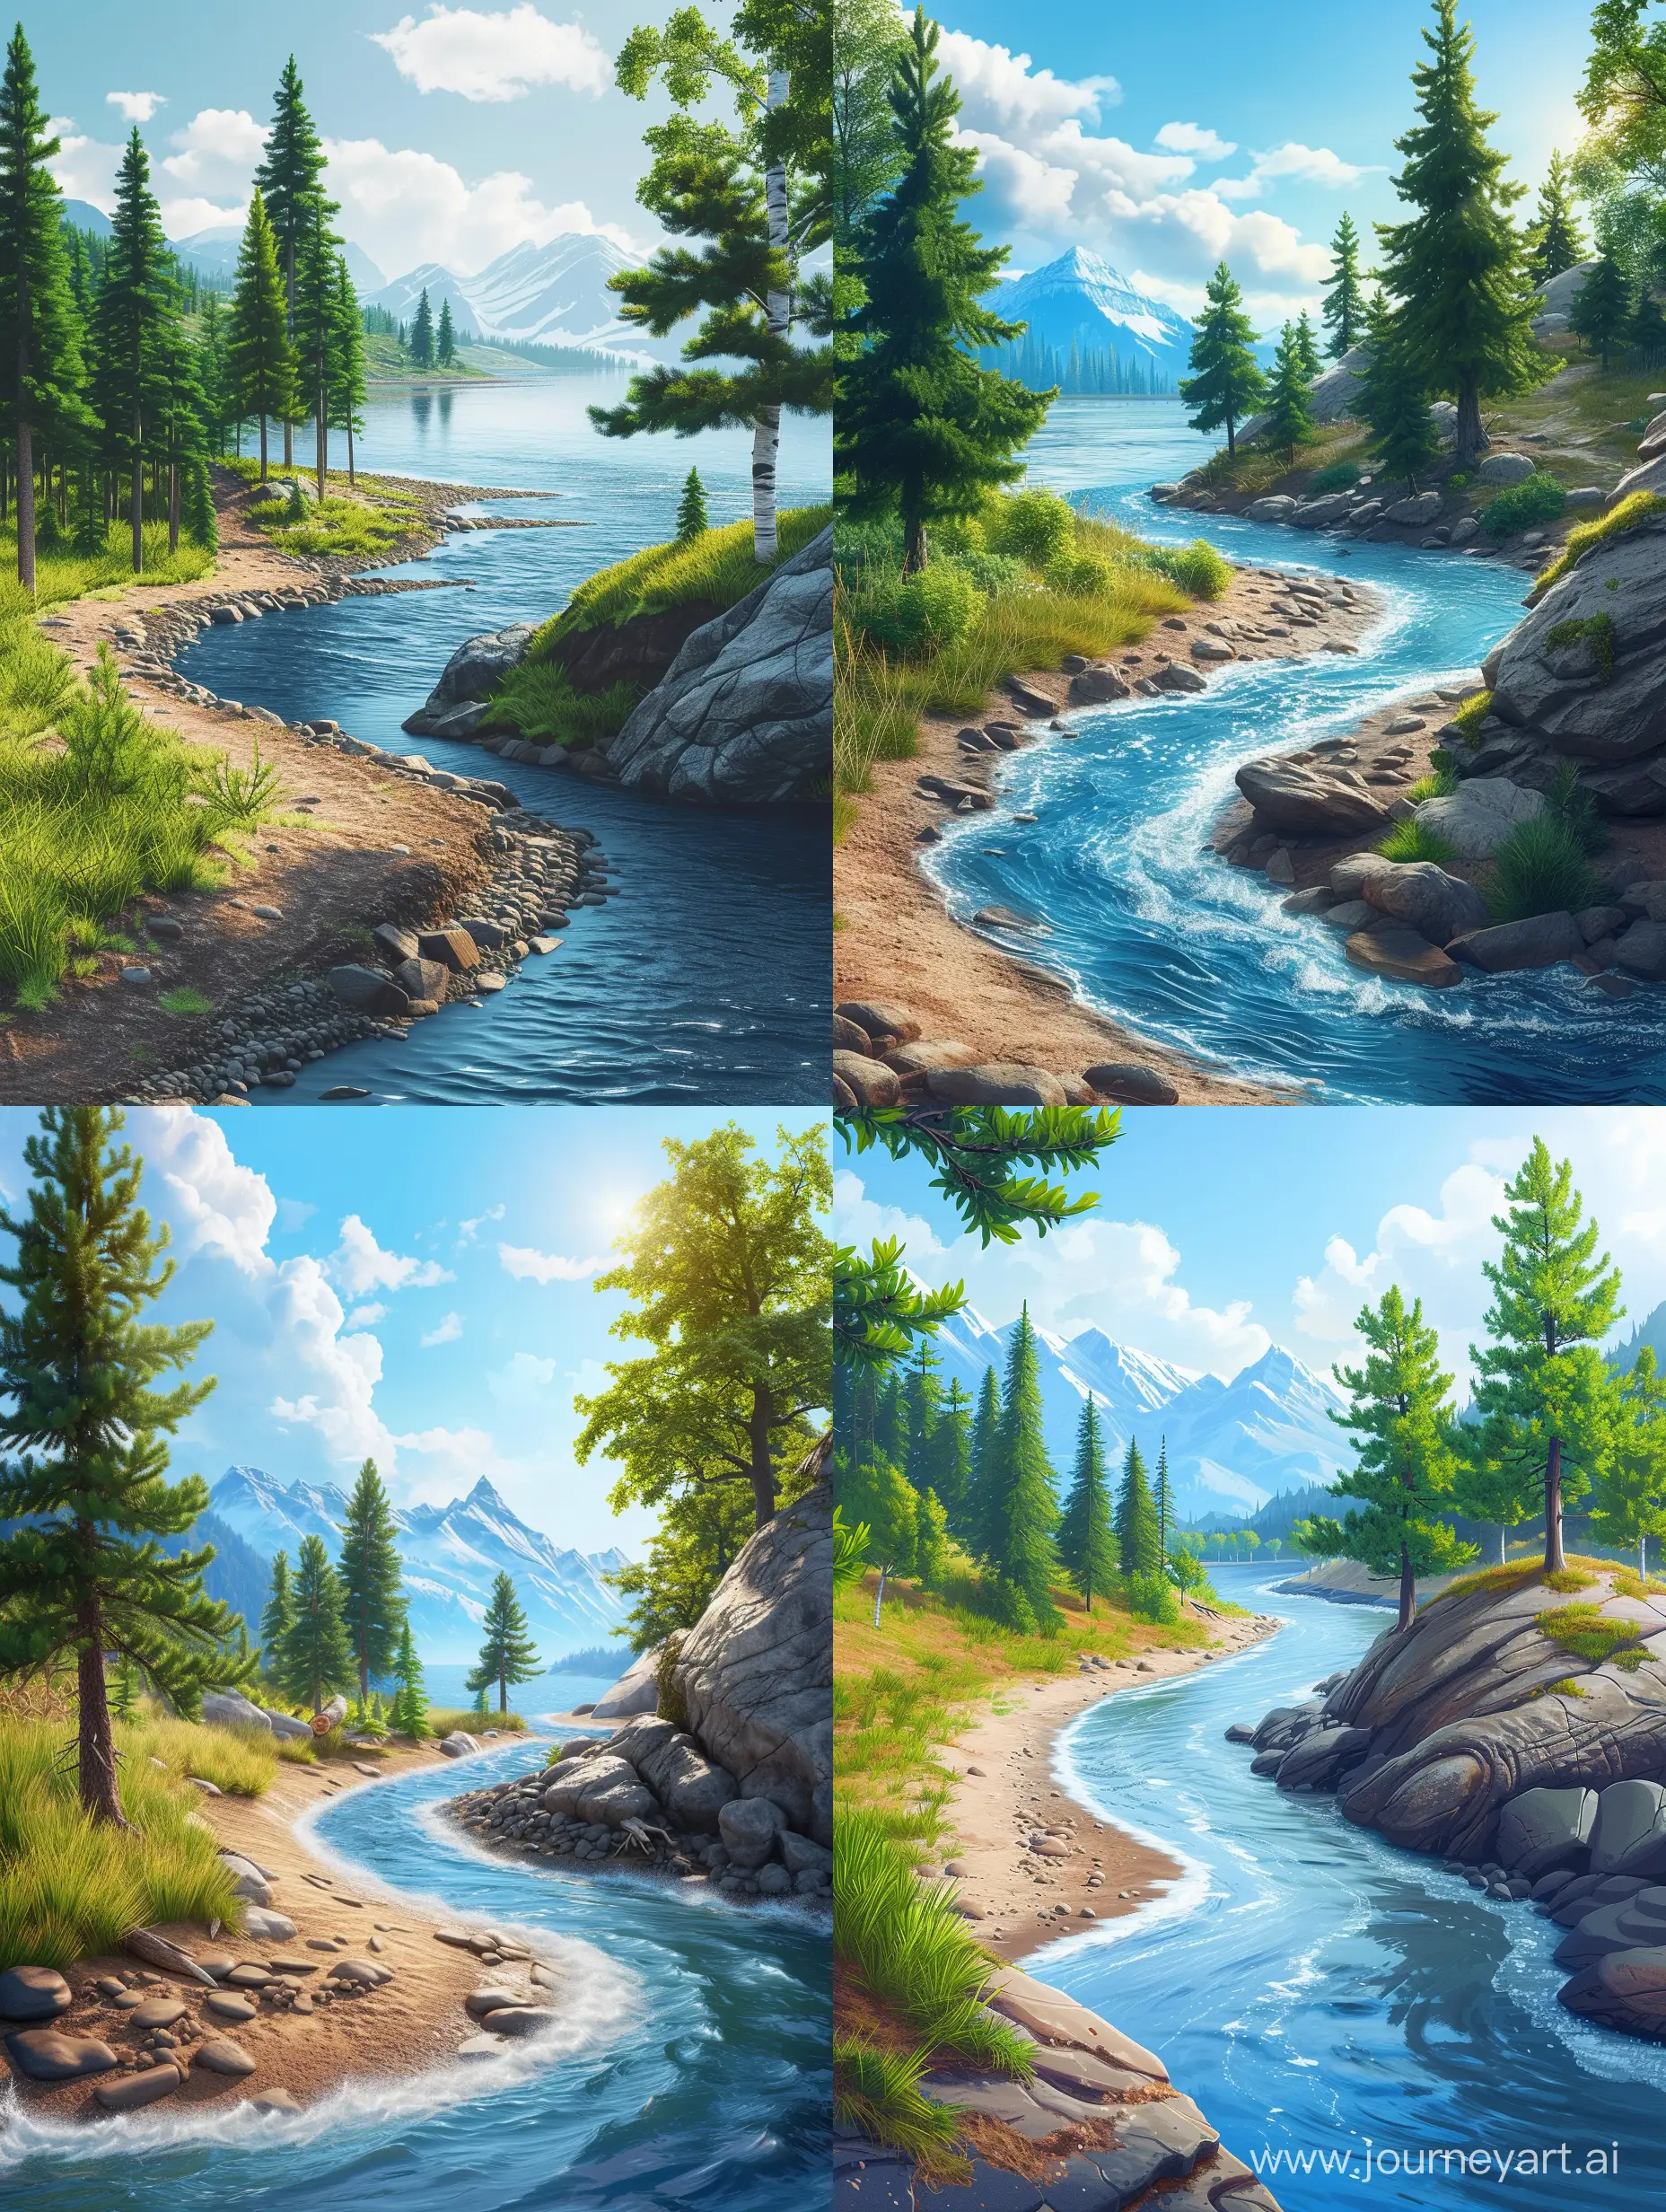 the Pixar-style landscape is a winding river, rocky shores, next to a rock on which fir trees grow on the left side of the river, there is birch spruce grass, blue mountains are visible in the distance, the sun shines and there are clouds